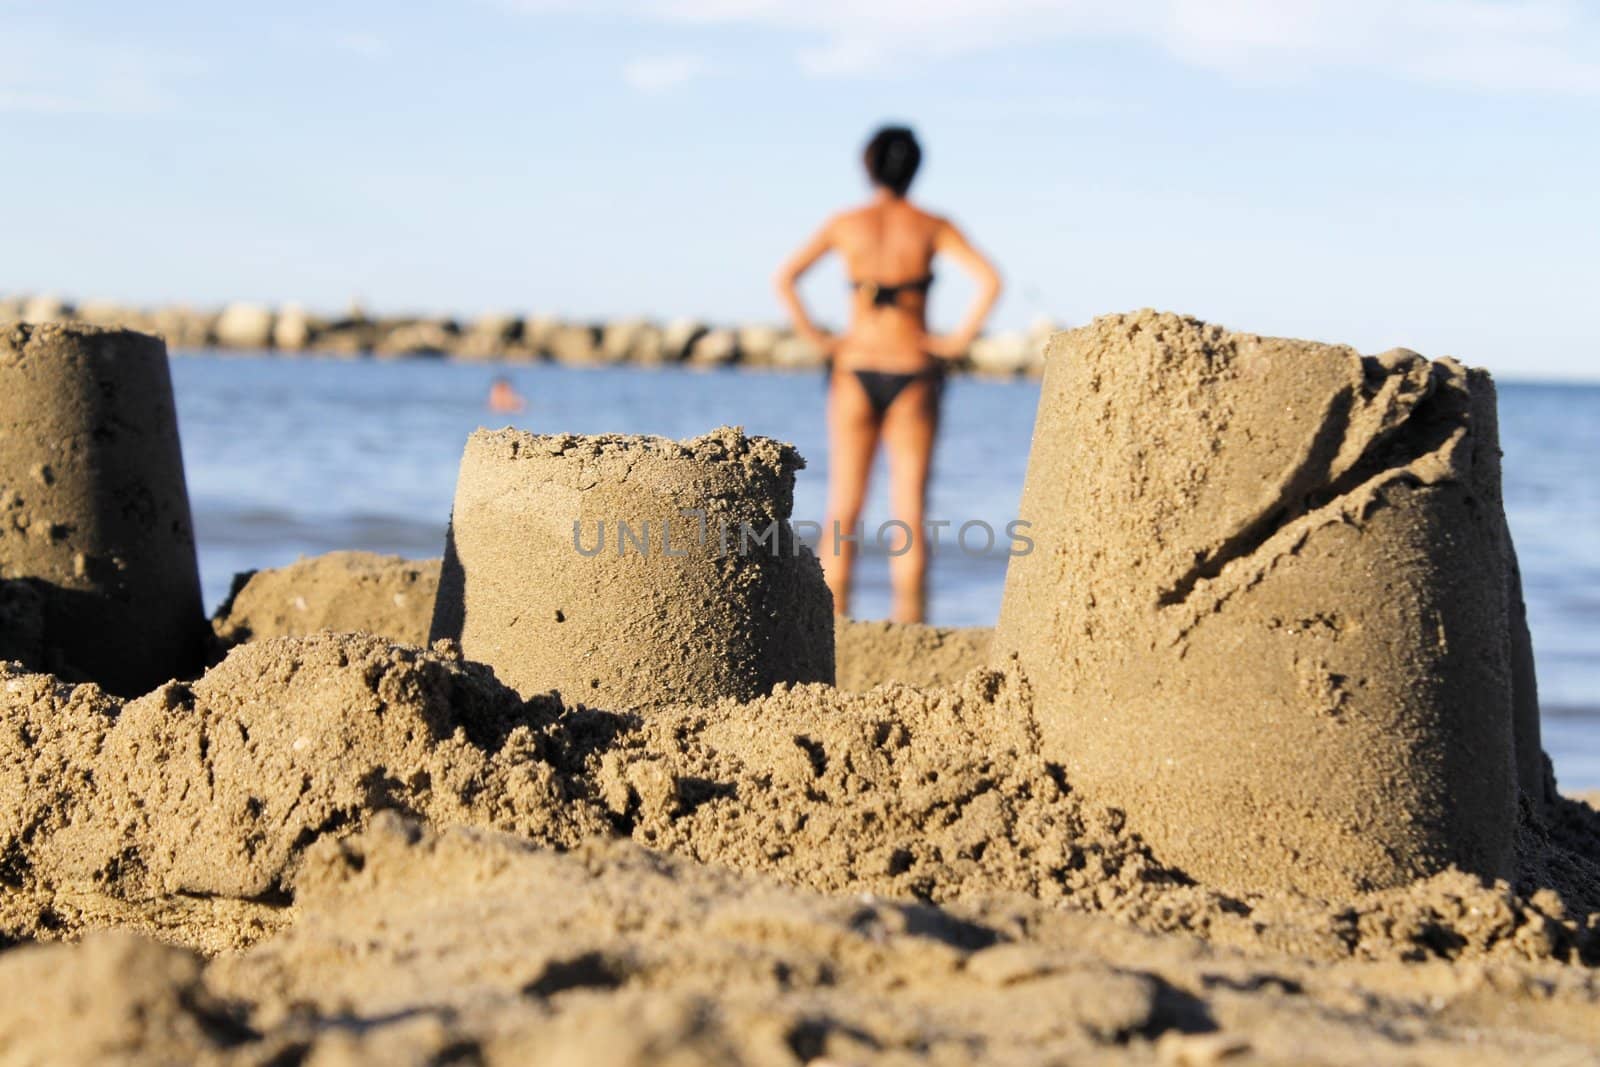 sand castle by marcobir